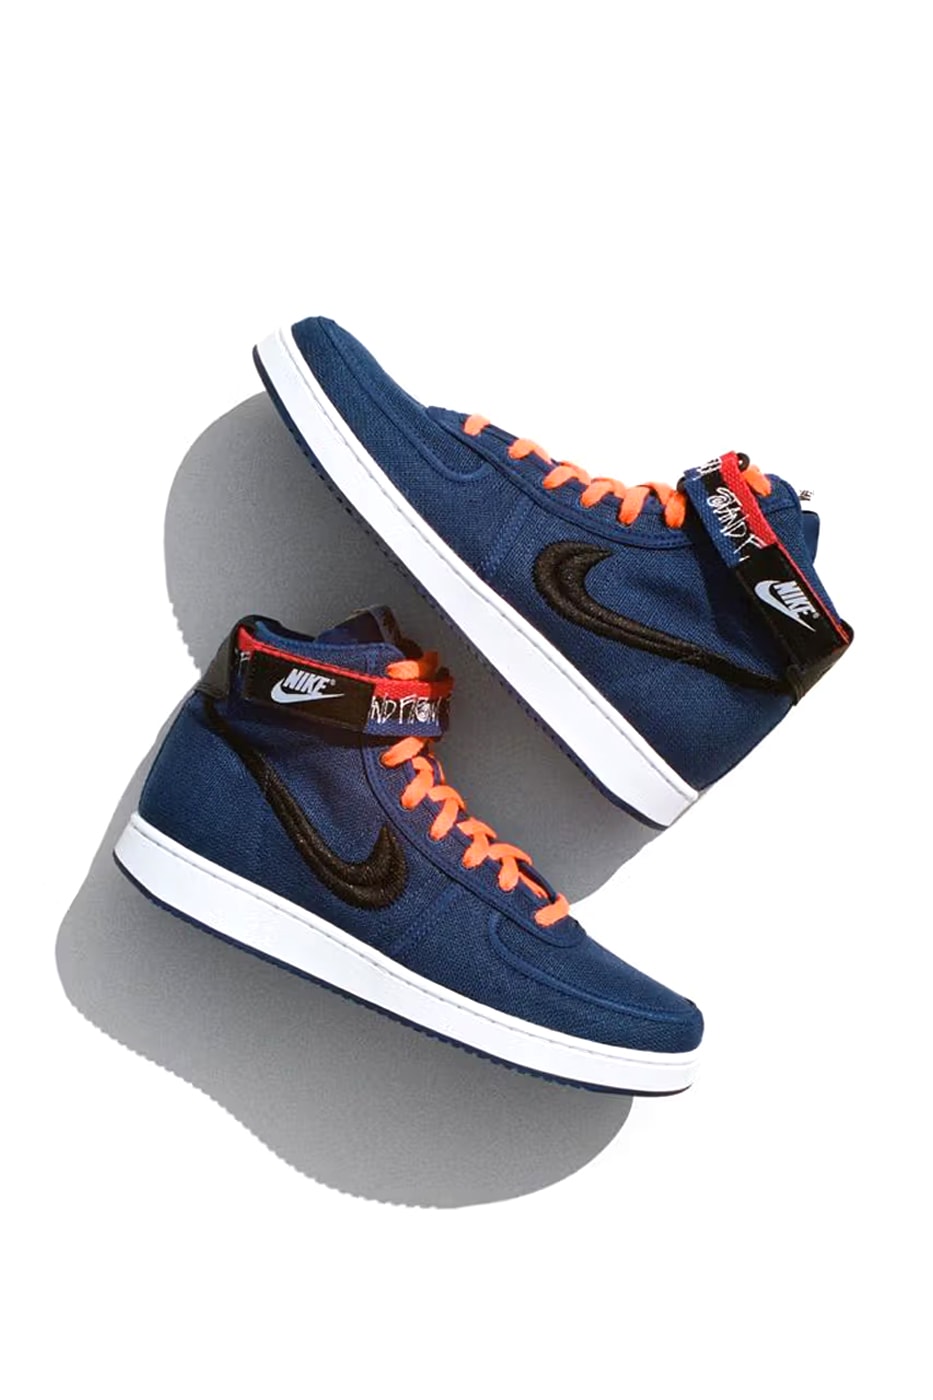 Stüssy Nike Vandal Collection DX5425-400 Release Date info store list buying guide photos price